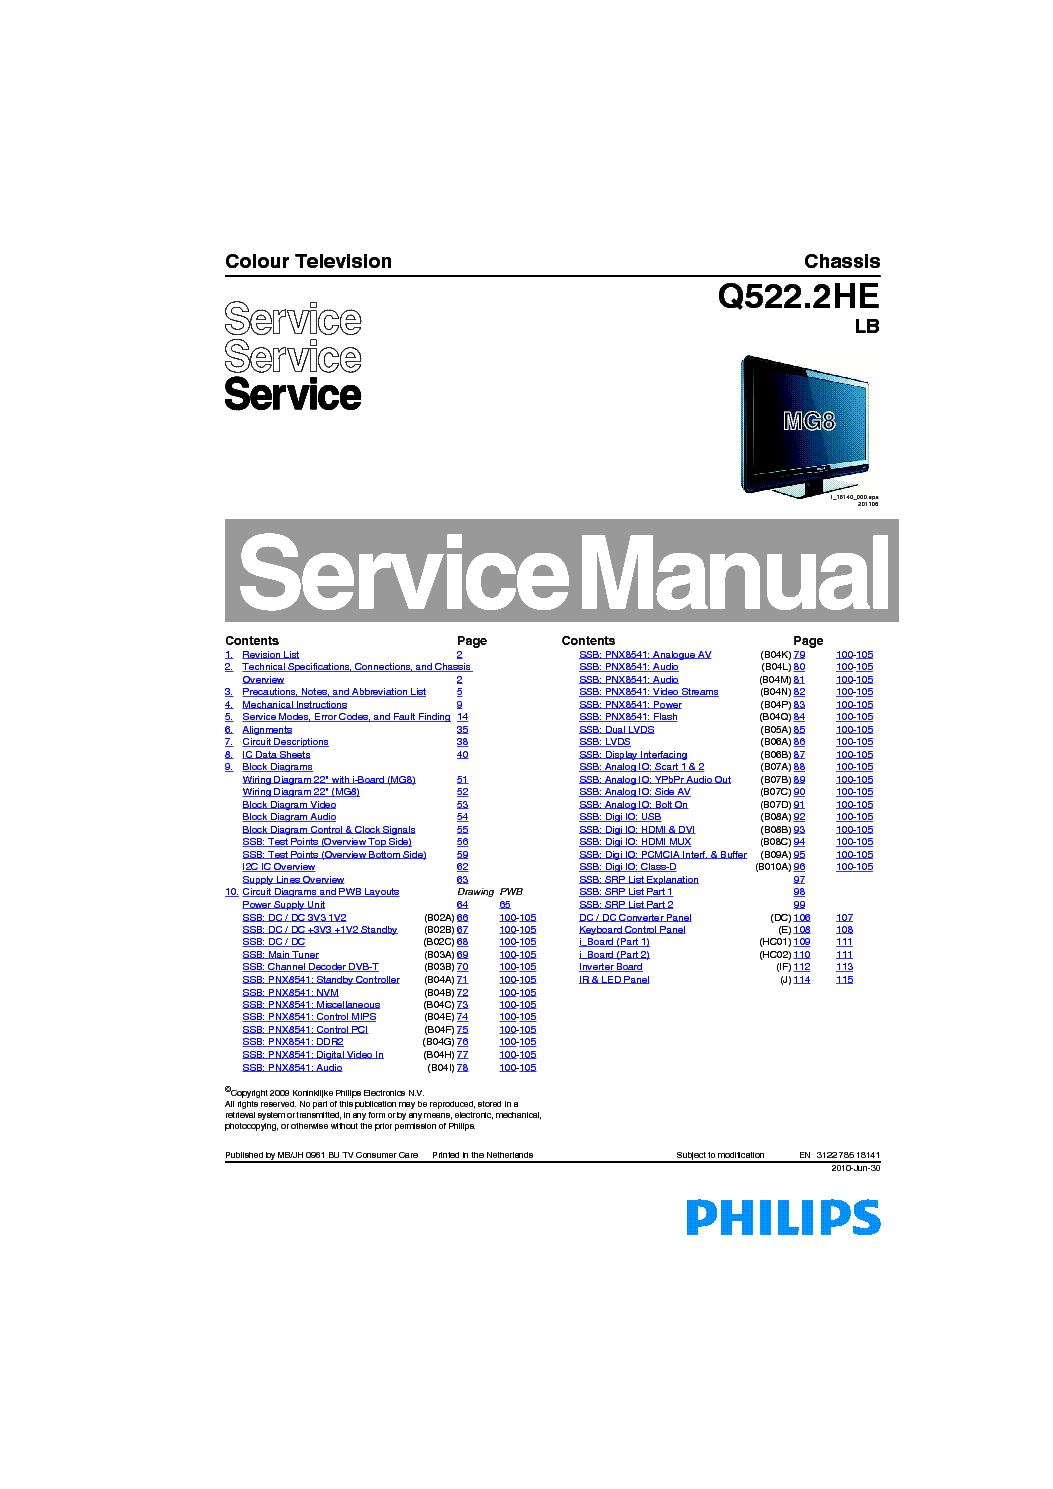 PHILIPS 22HFL3350D-10 CHASSIS Q522.2HE LB SM service manual (1st page)